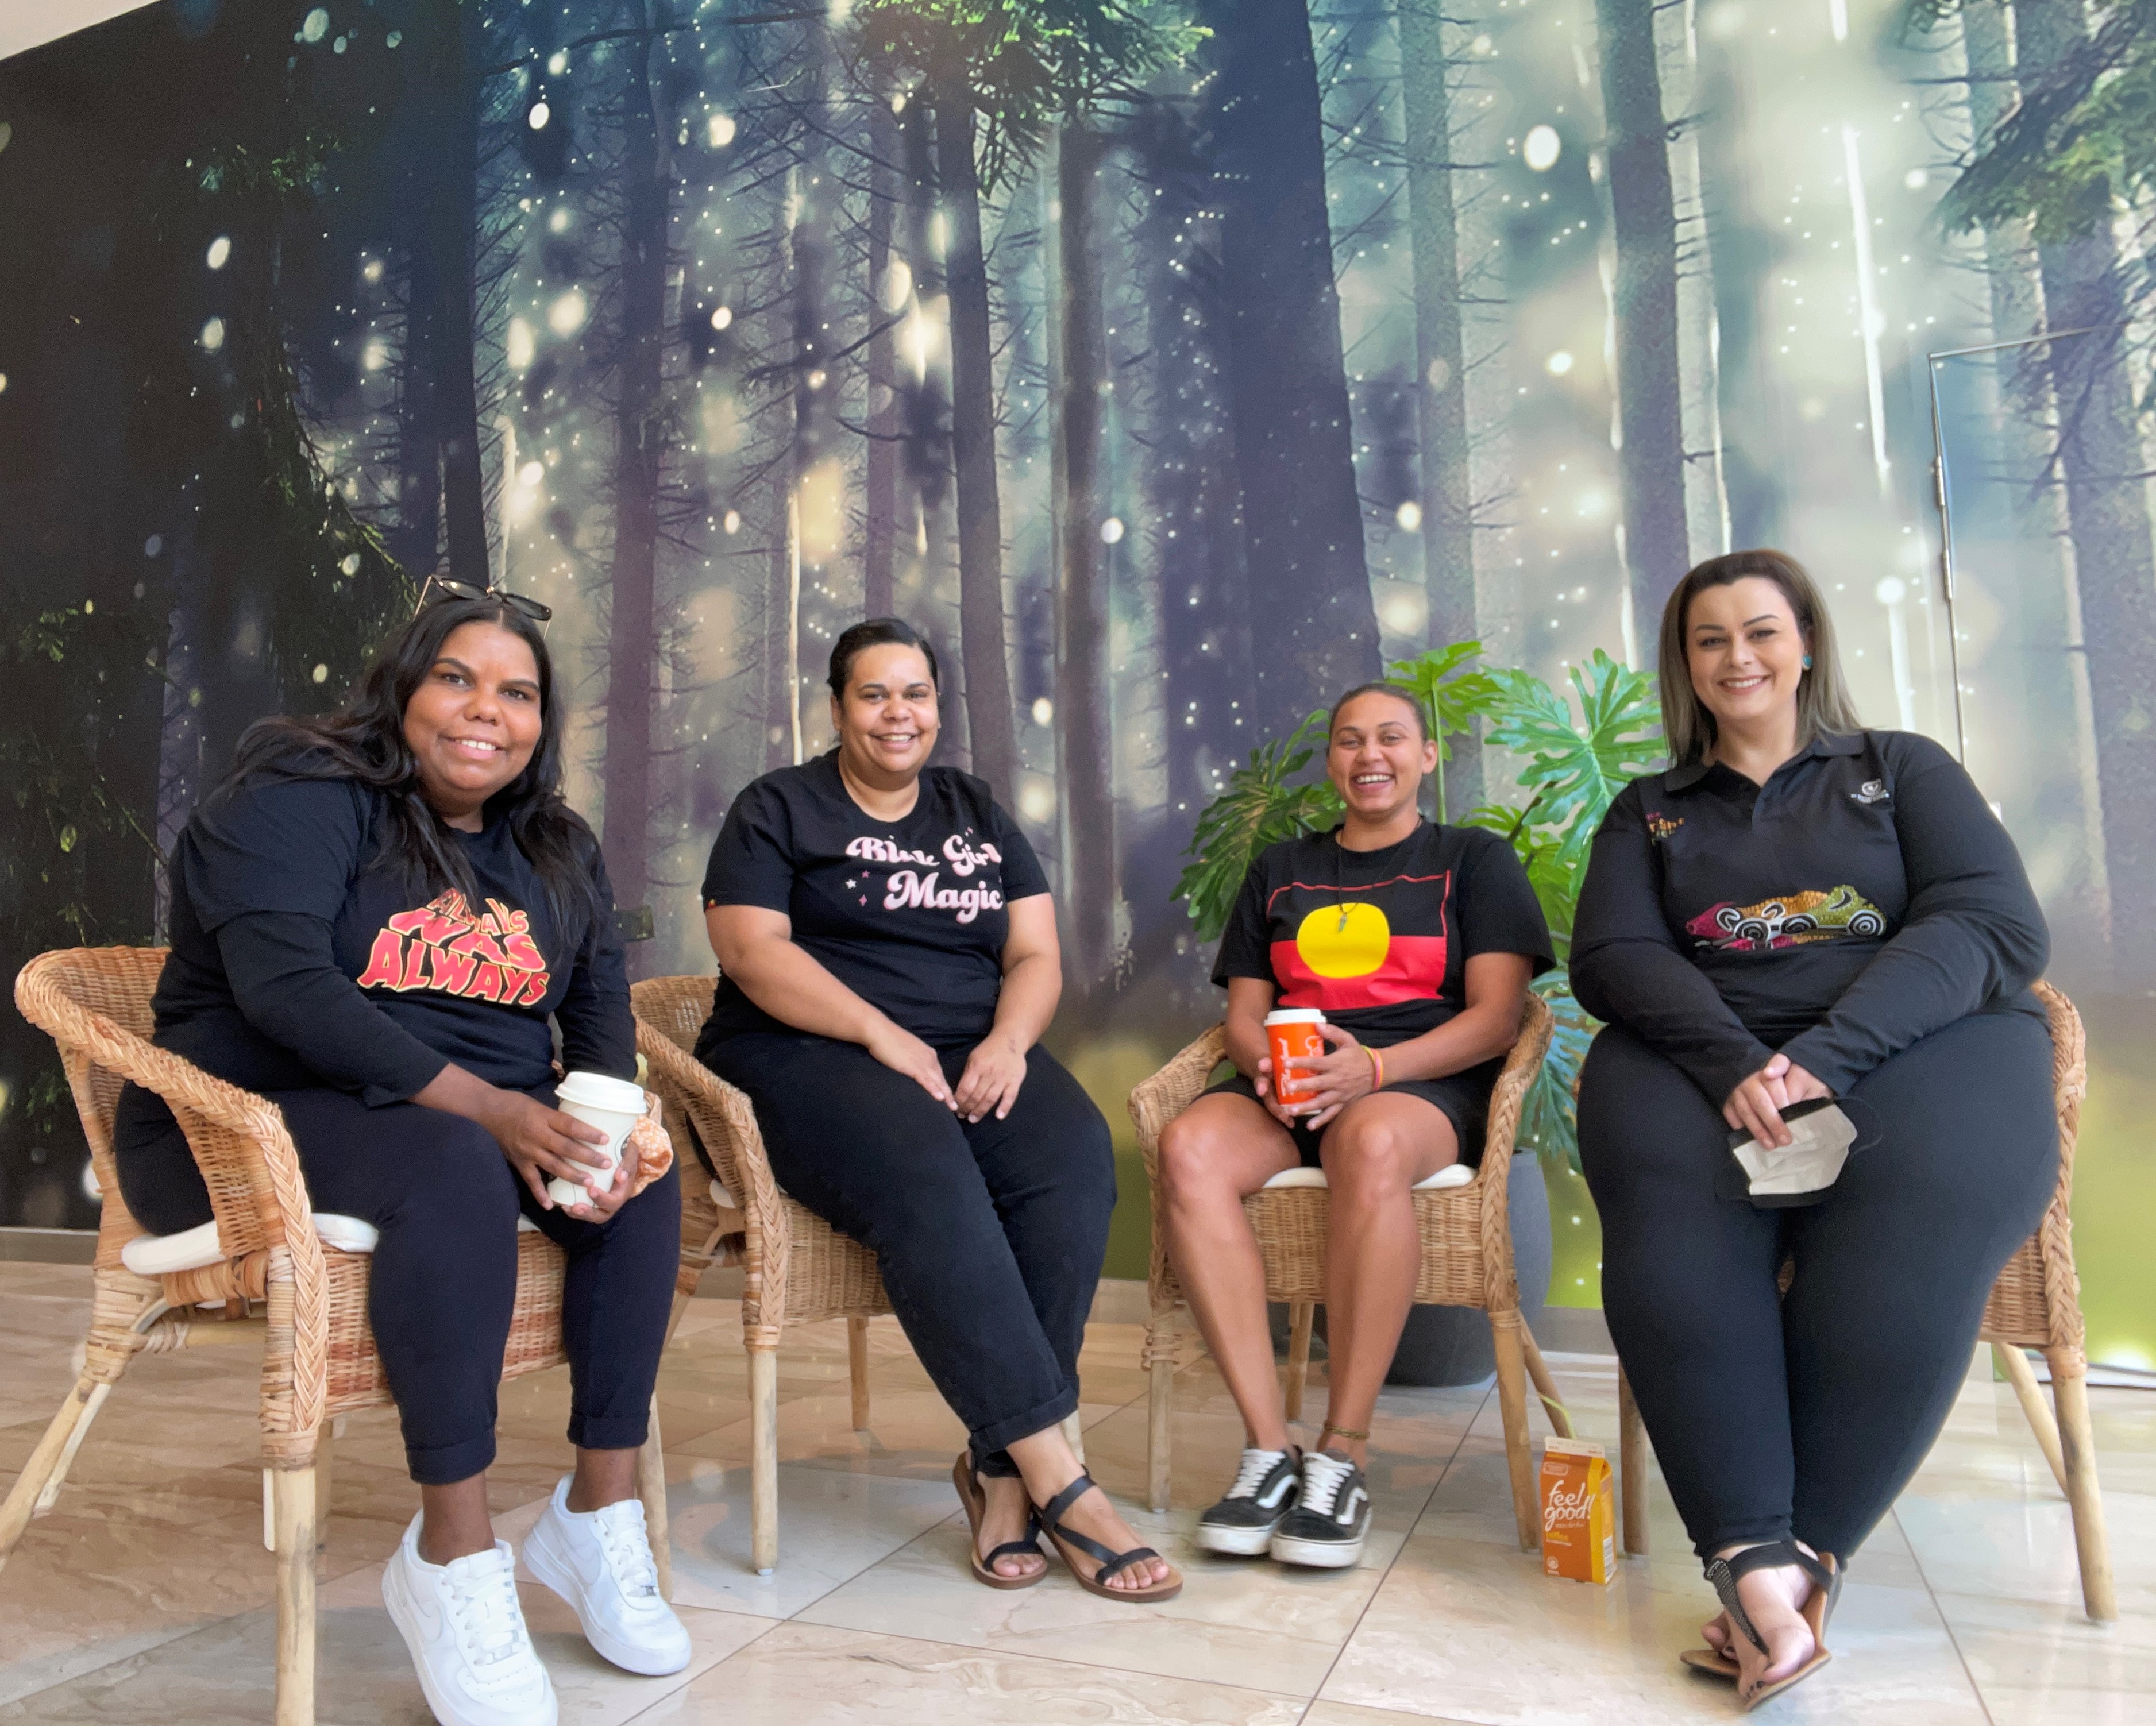 Four women, wearing black pants and a variety of Indigenous artwork tshirts shit in a row with big smiles. They are sitting in wooden chairs in front of a decorative painted wall